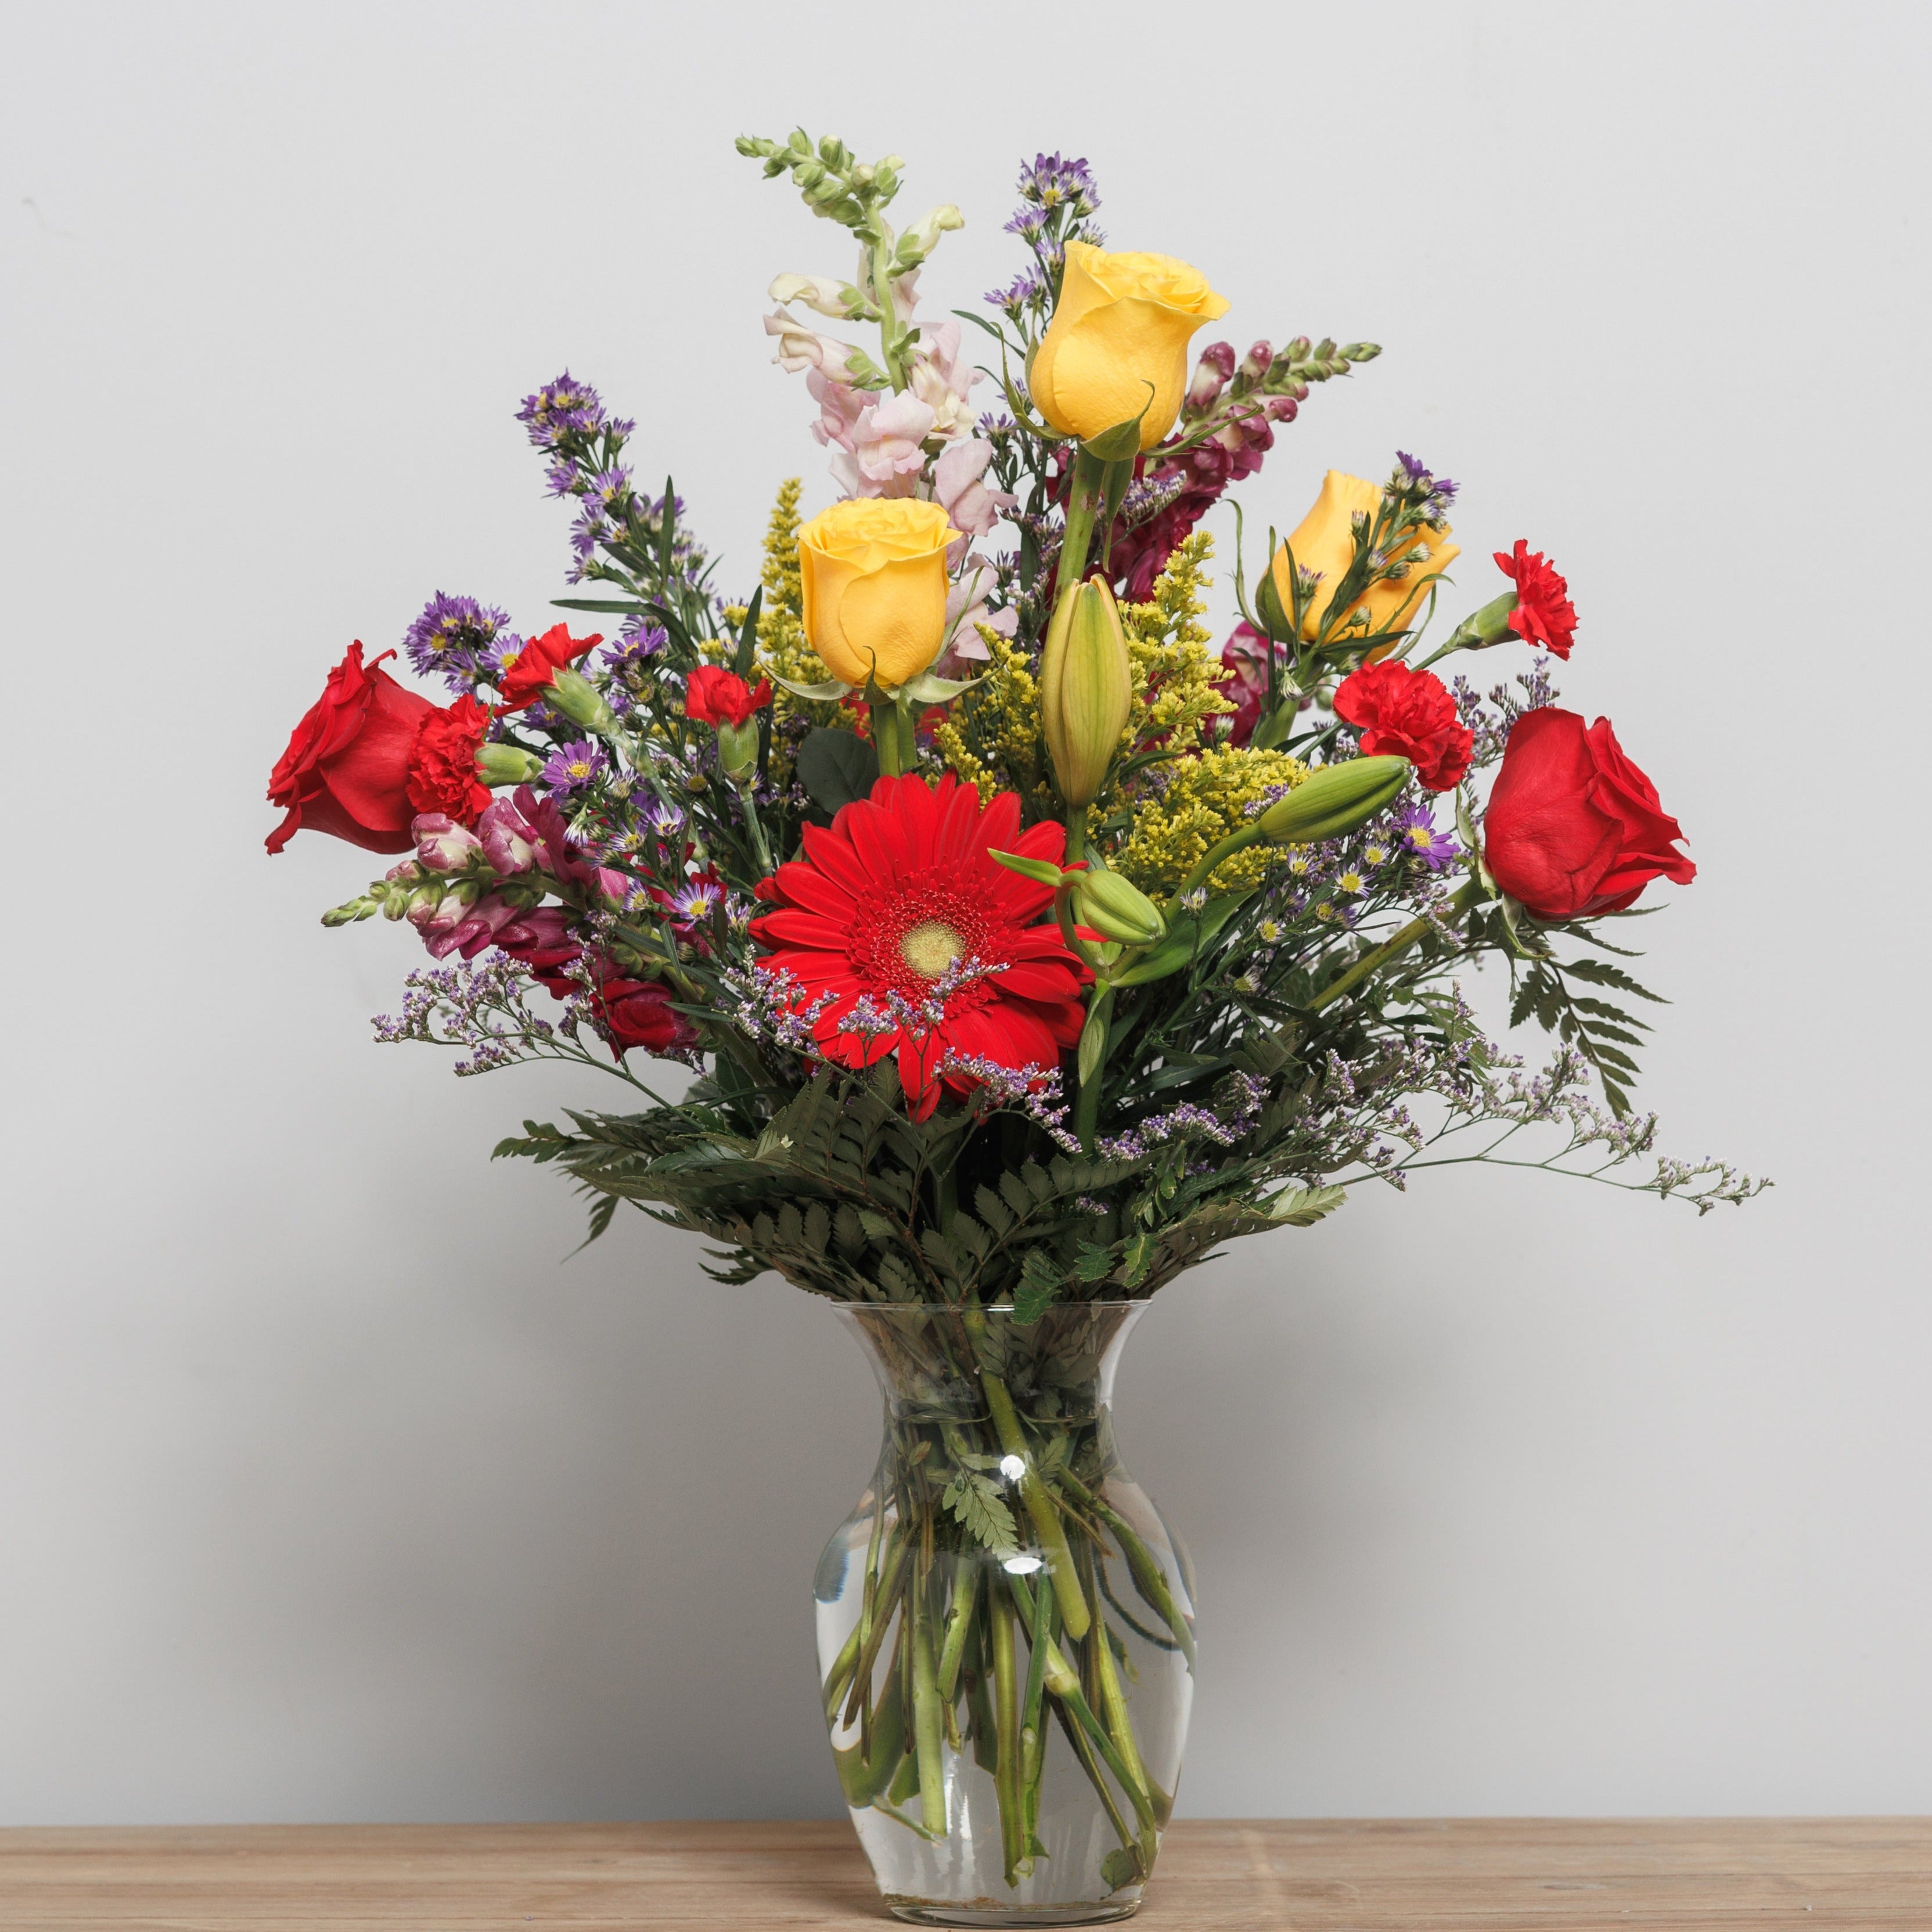 A bright colored flower arrangement in a vase.